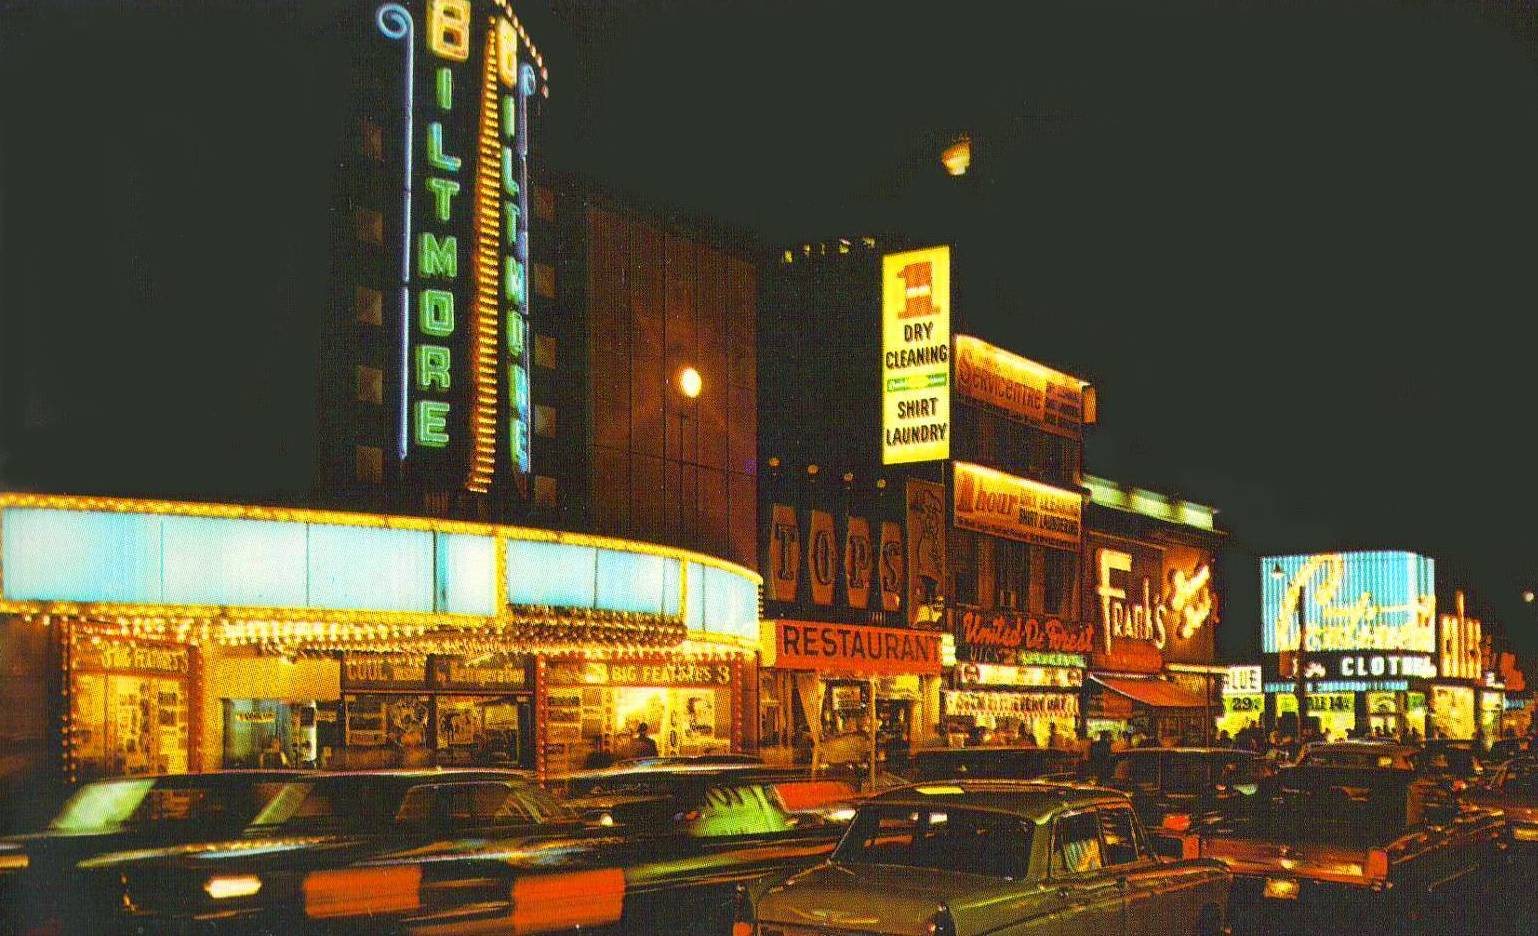 AA PHOTO - TORONTO - YONGE STREET - NIGHT - GROUND LEVEL NEAR DUNDAS - SUBSTANTIAL TRAFFIC - BILTMORE THEATER - TOPS RESTAURANT - UNITED DE FOREST - CONTINENTAL CLOTHING - COLES - MID -1